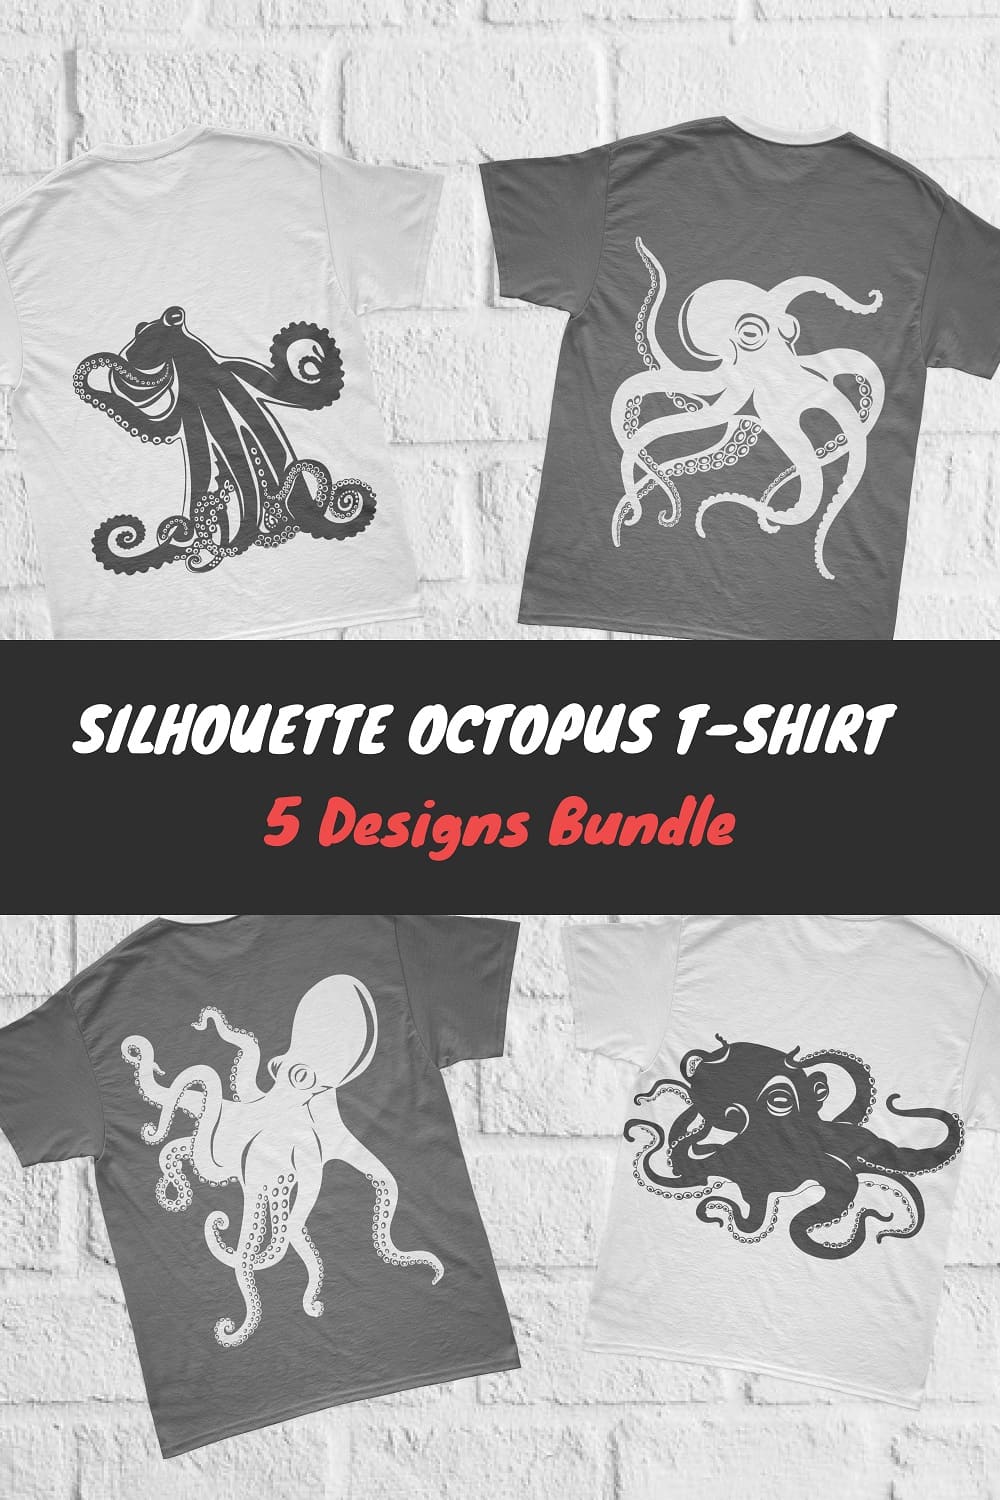 Four t-shirts with gray and white prints of octopus silhouettes against a white brick wall.